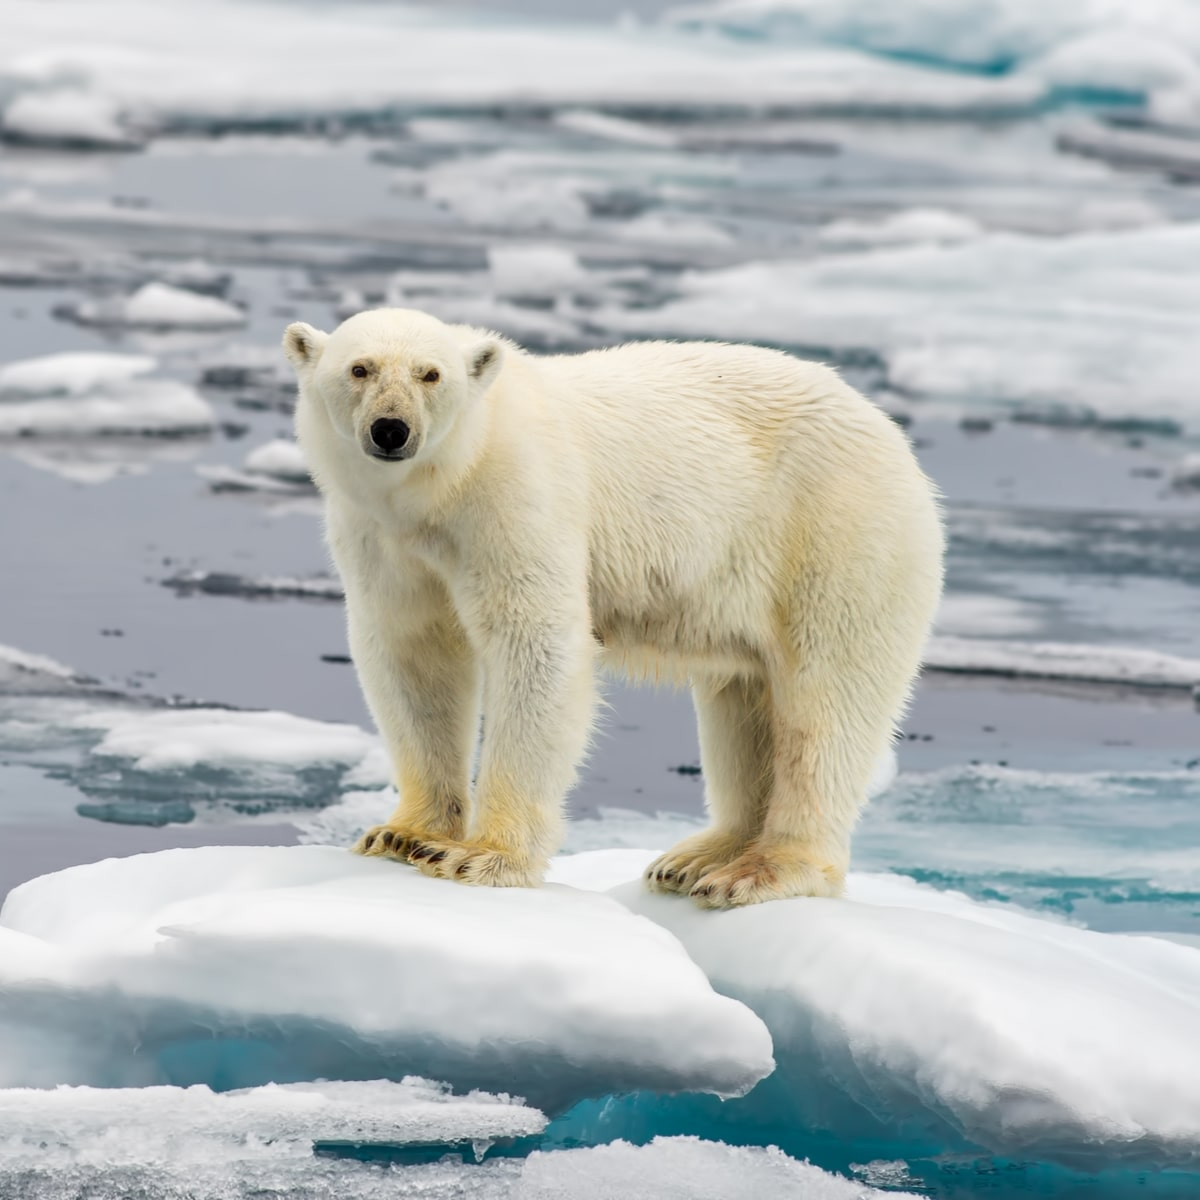 A polar bear stands on a floating chunk of ice.